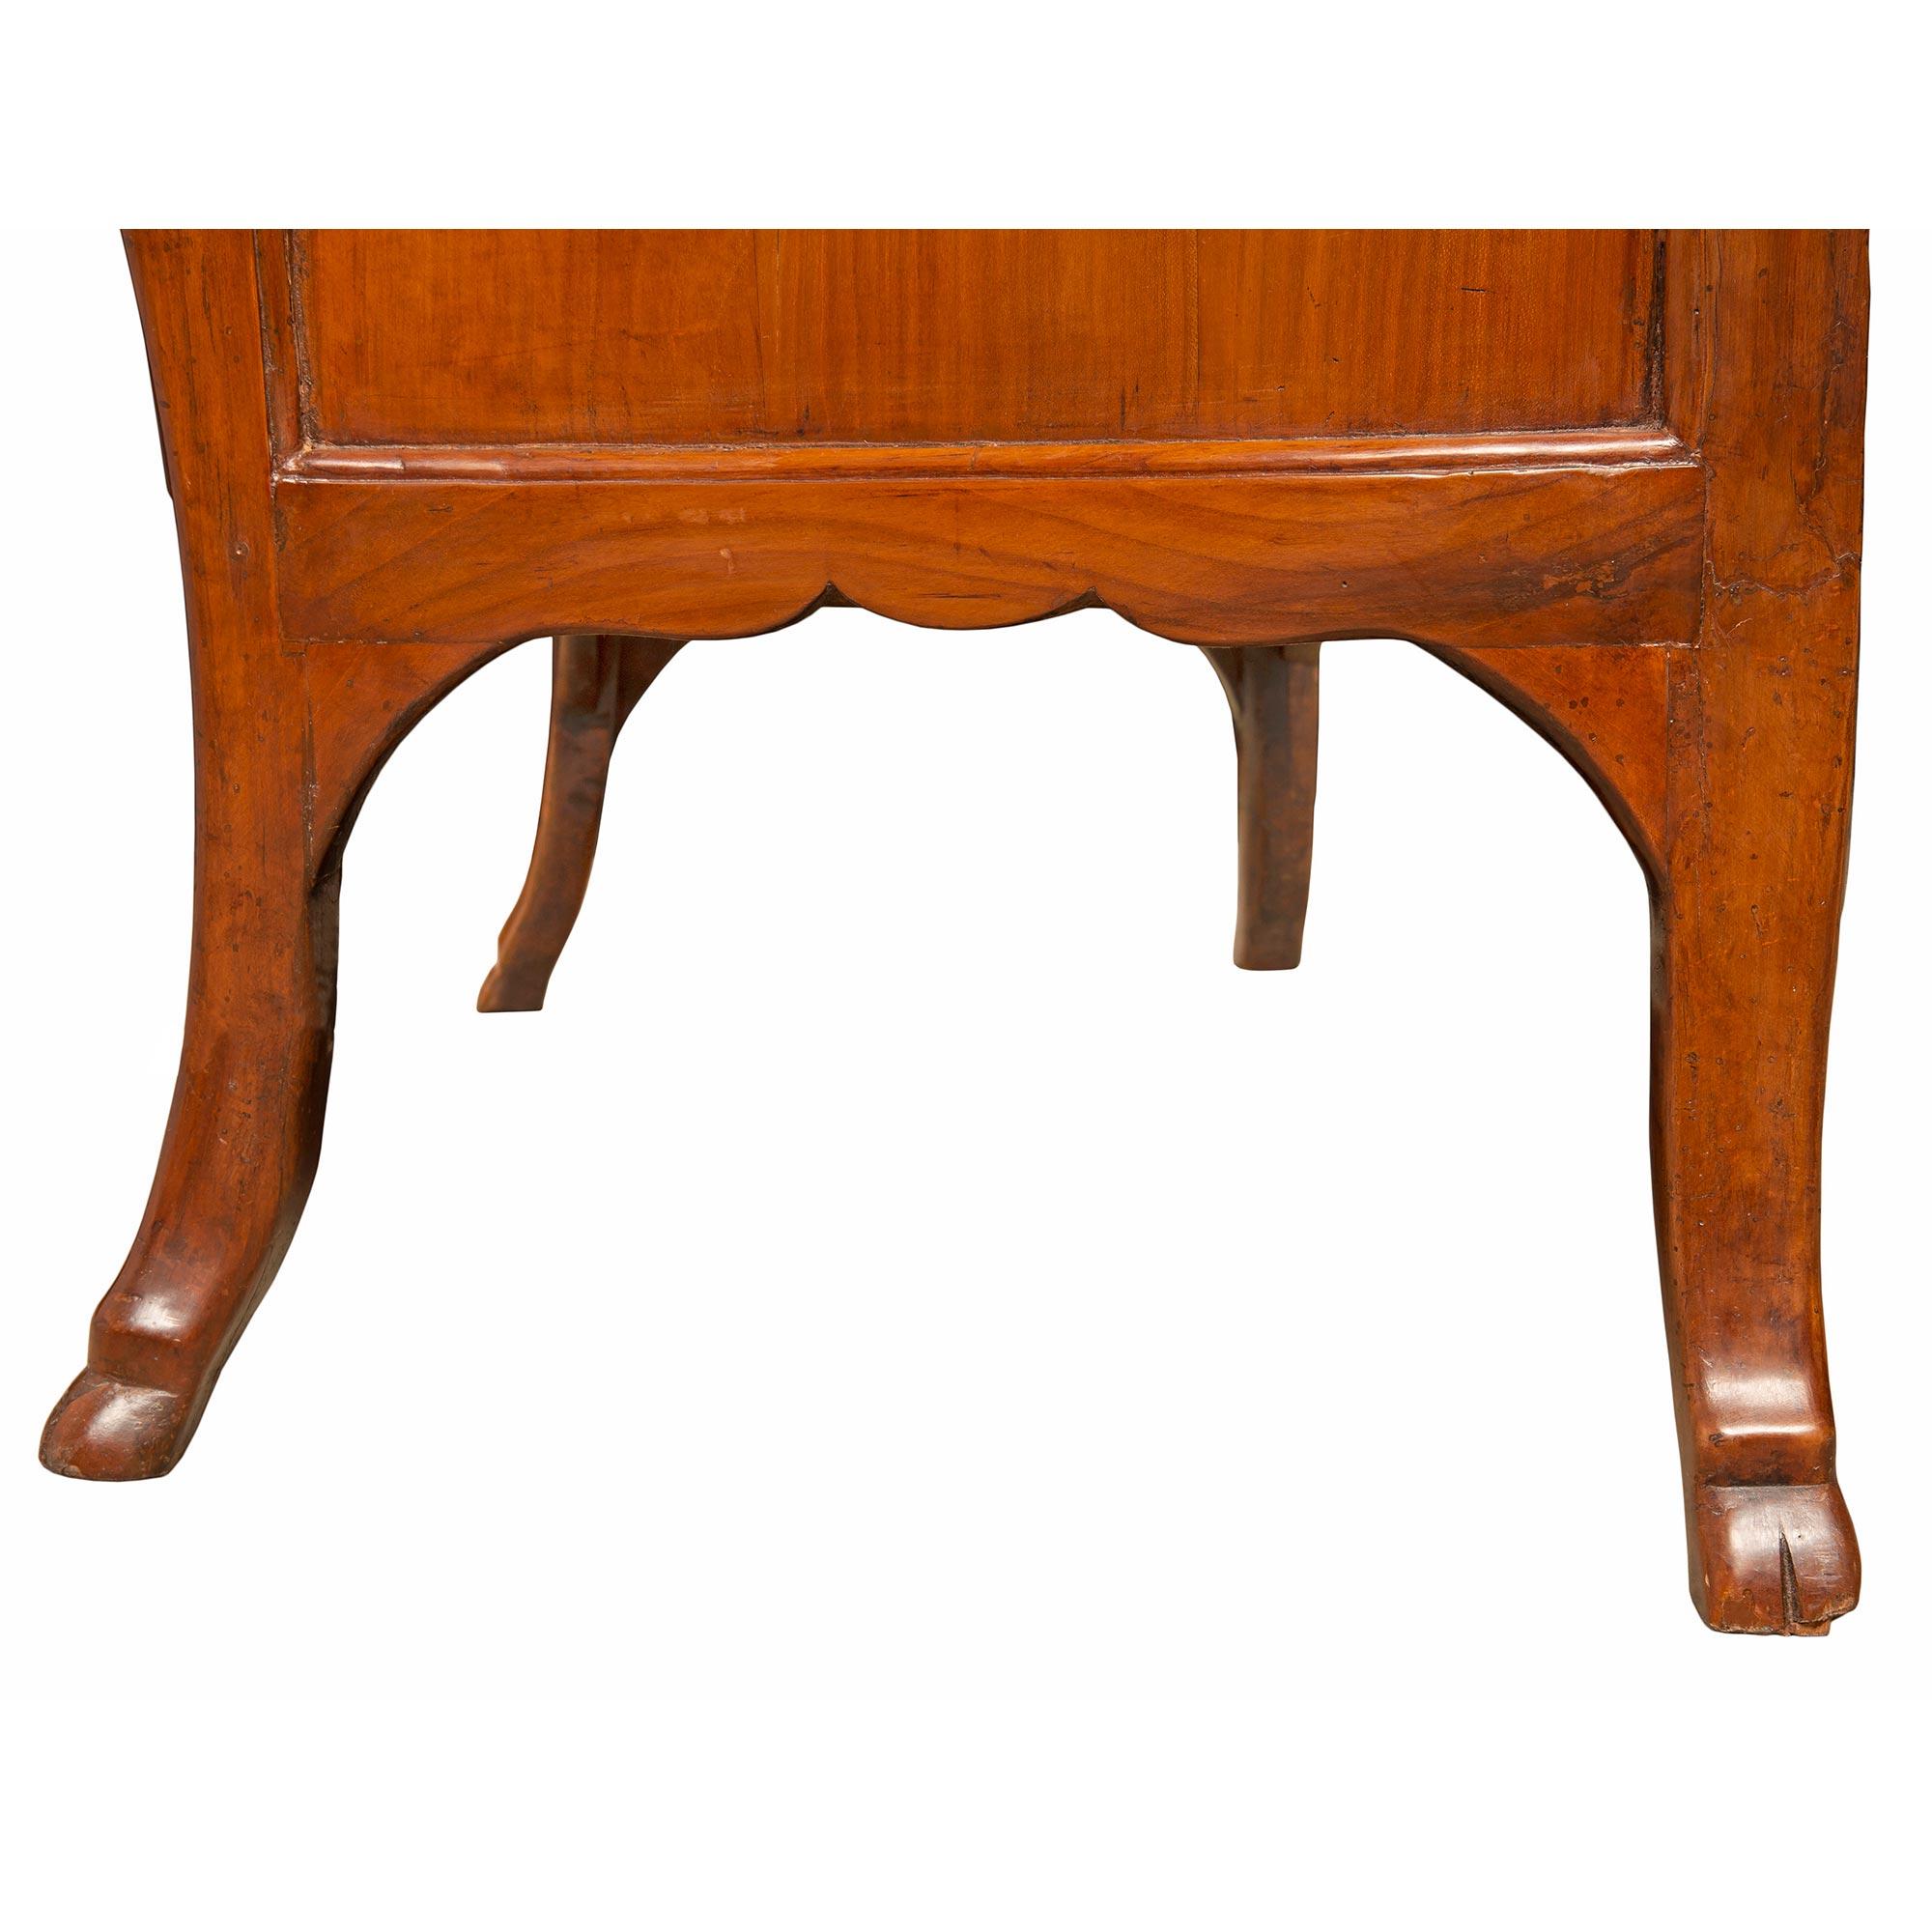 French 18th Century Louis XV Period Walnut Petite Commode Bordelaise For Sale 2